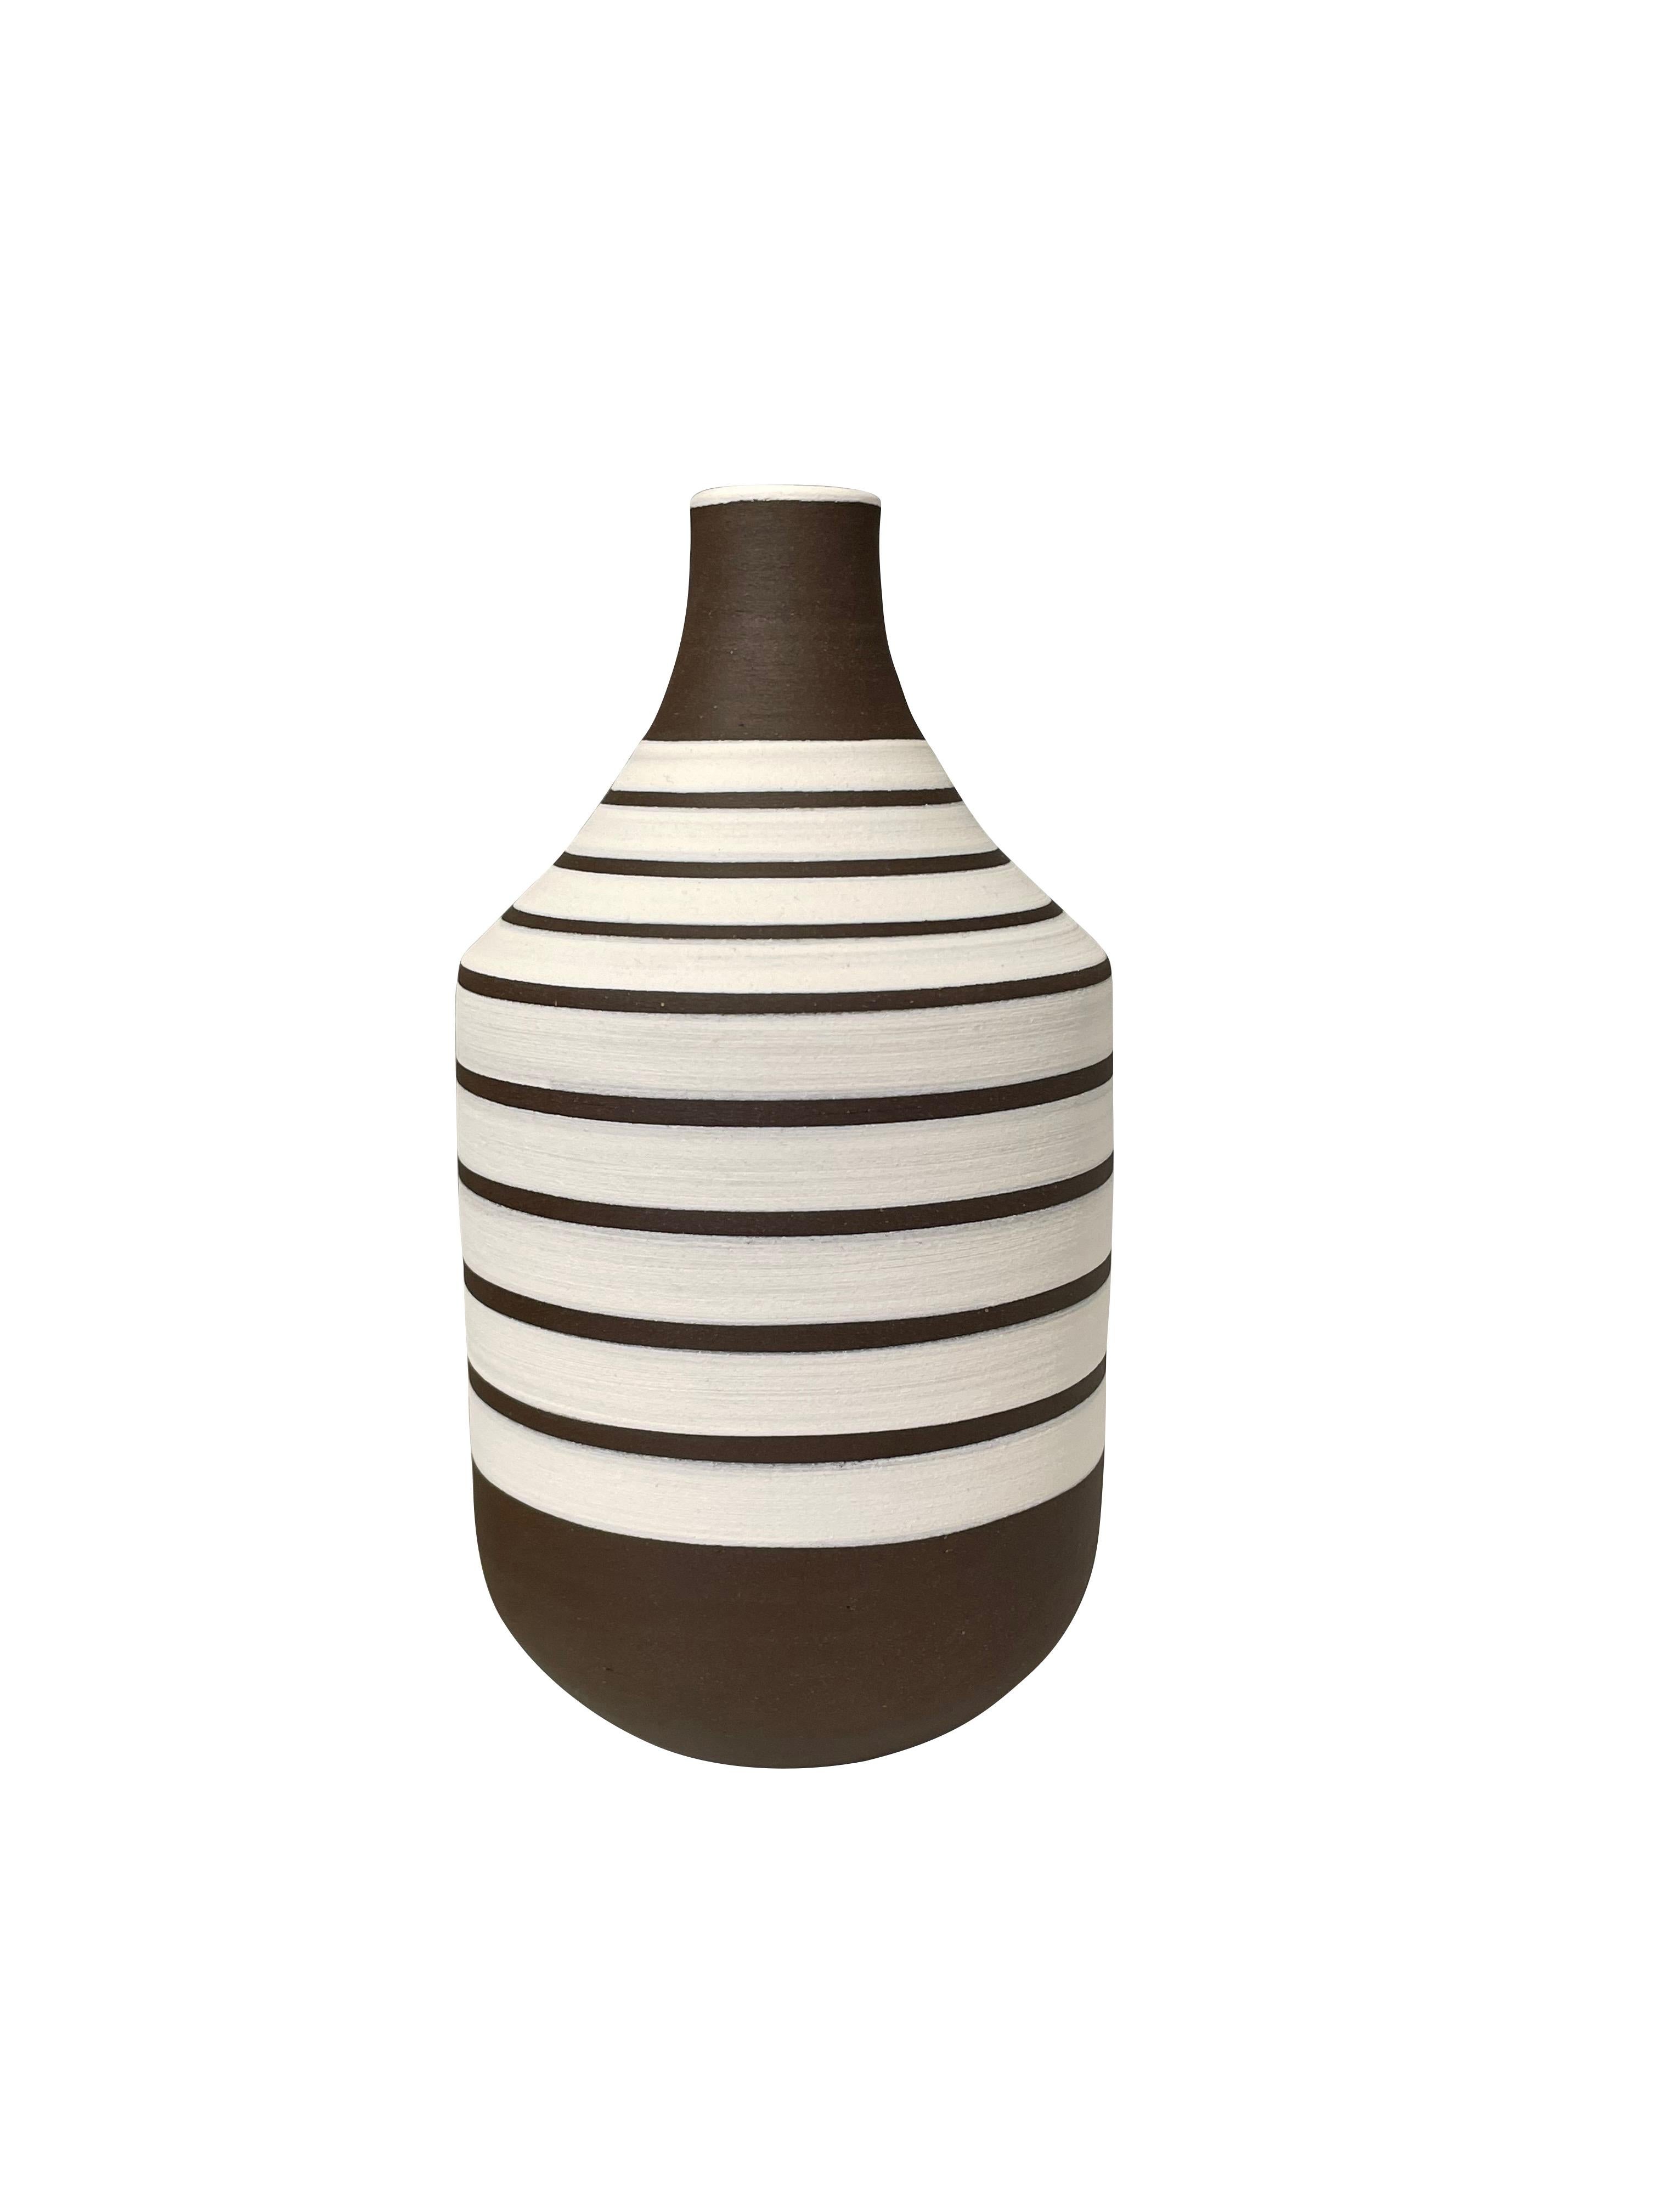 Contemporary Turkish white ground vase with dark brown stripes.
Dark brown wide mouth opening and base.
Can hold water.
From a large collection.